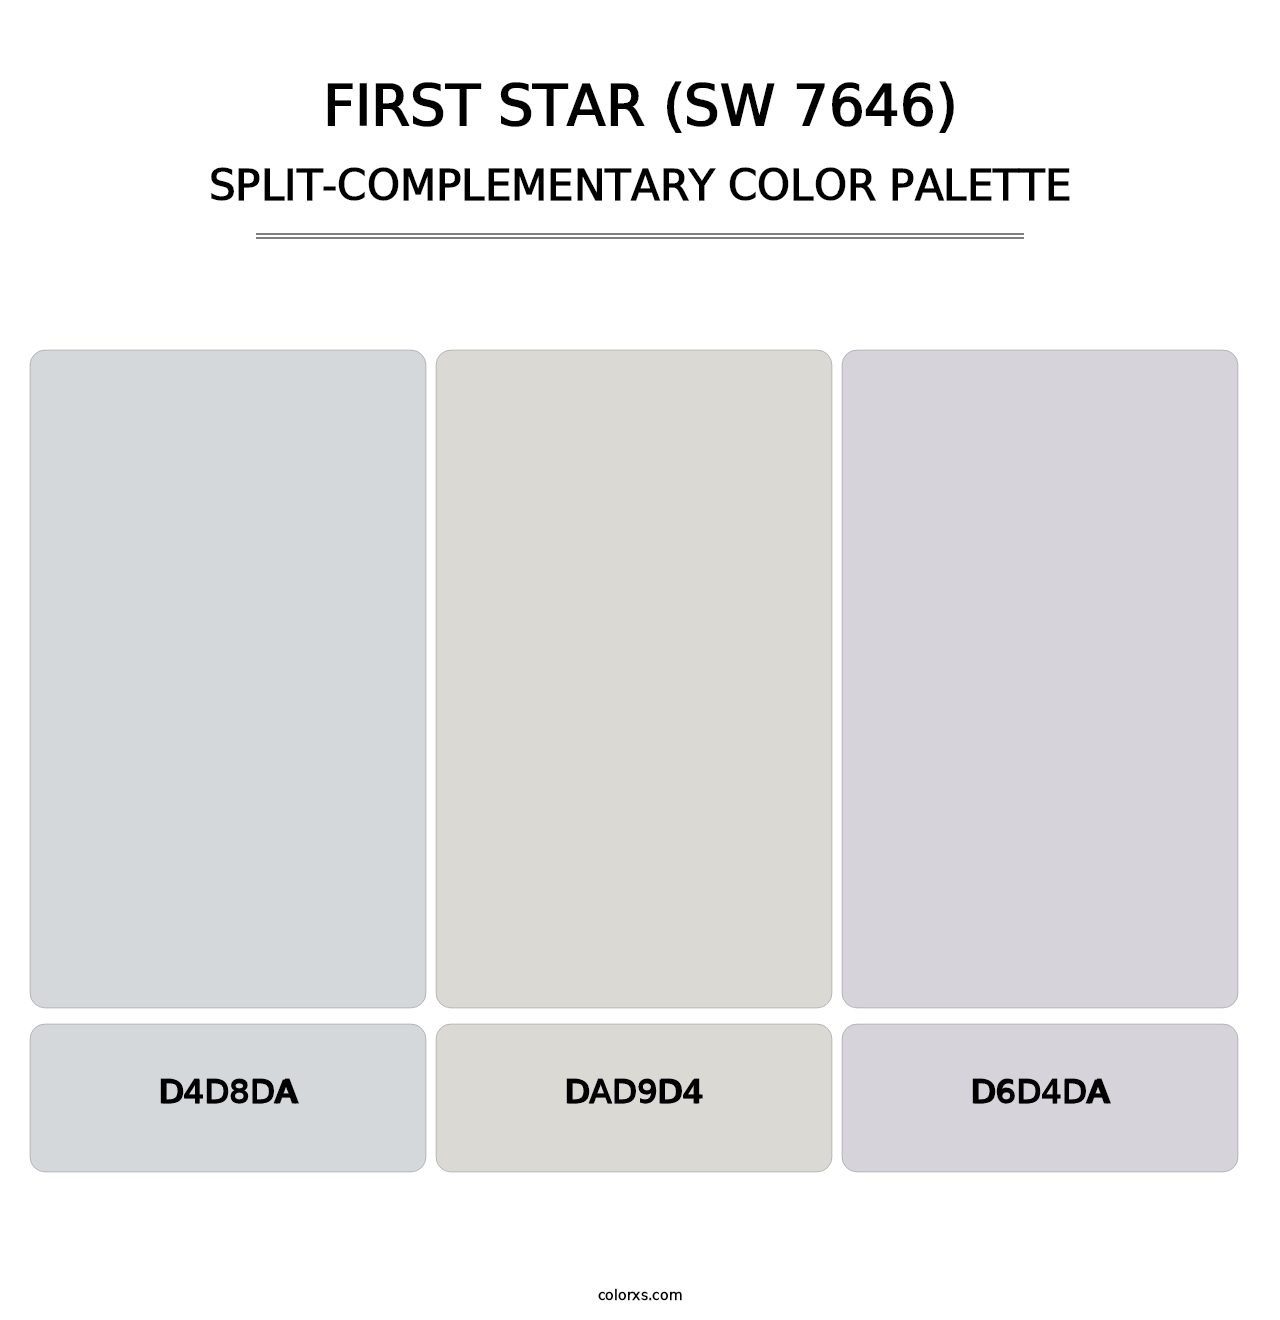 First Star (SW 7646) - Split-Complementary Color Palette